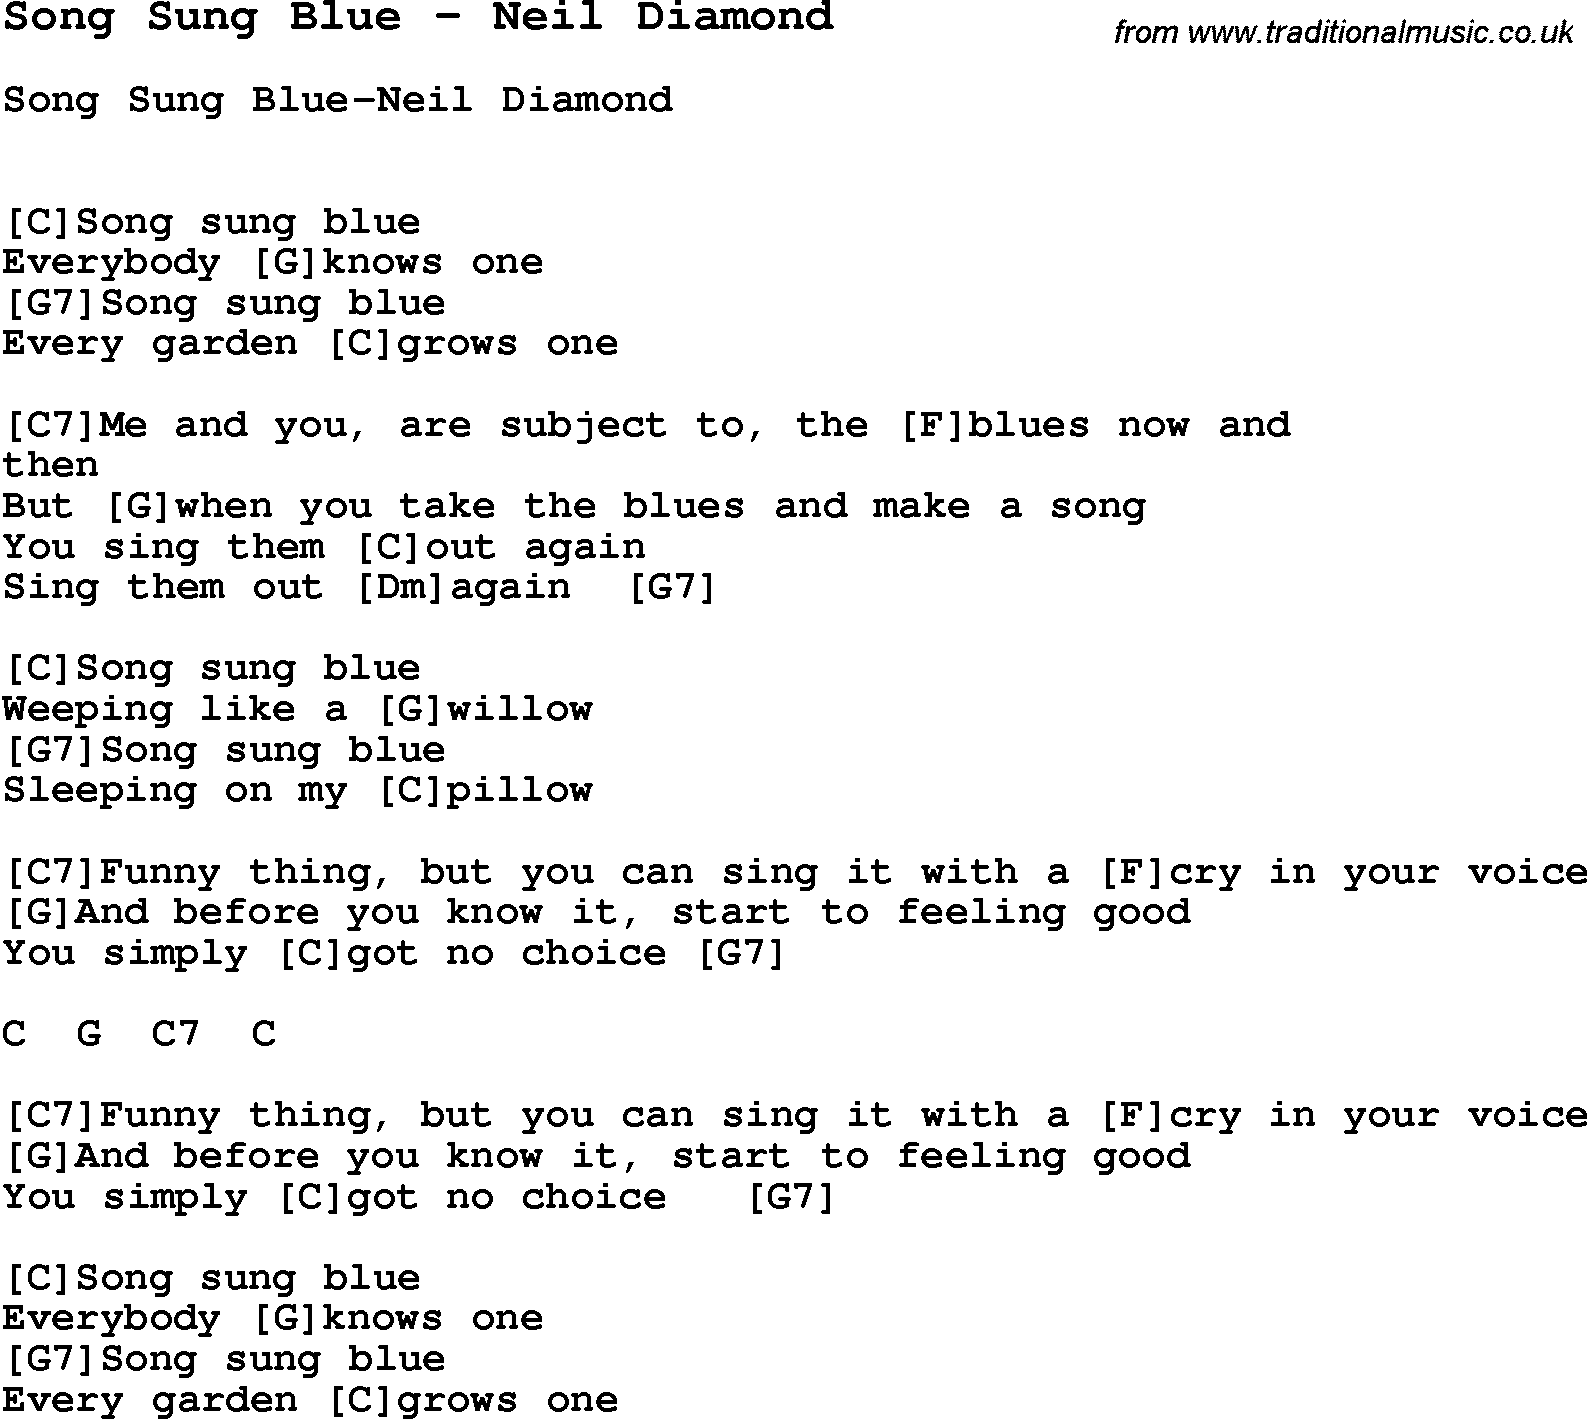 Song Song Sung Blue By Neil Diamond Song Lyric For Vocal Performance